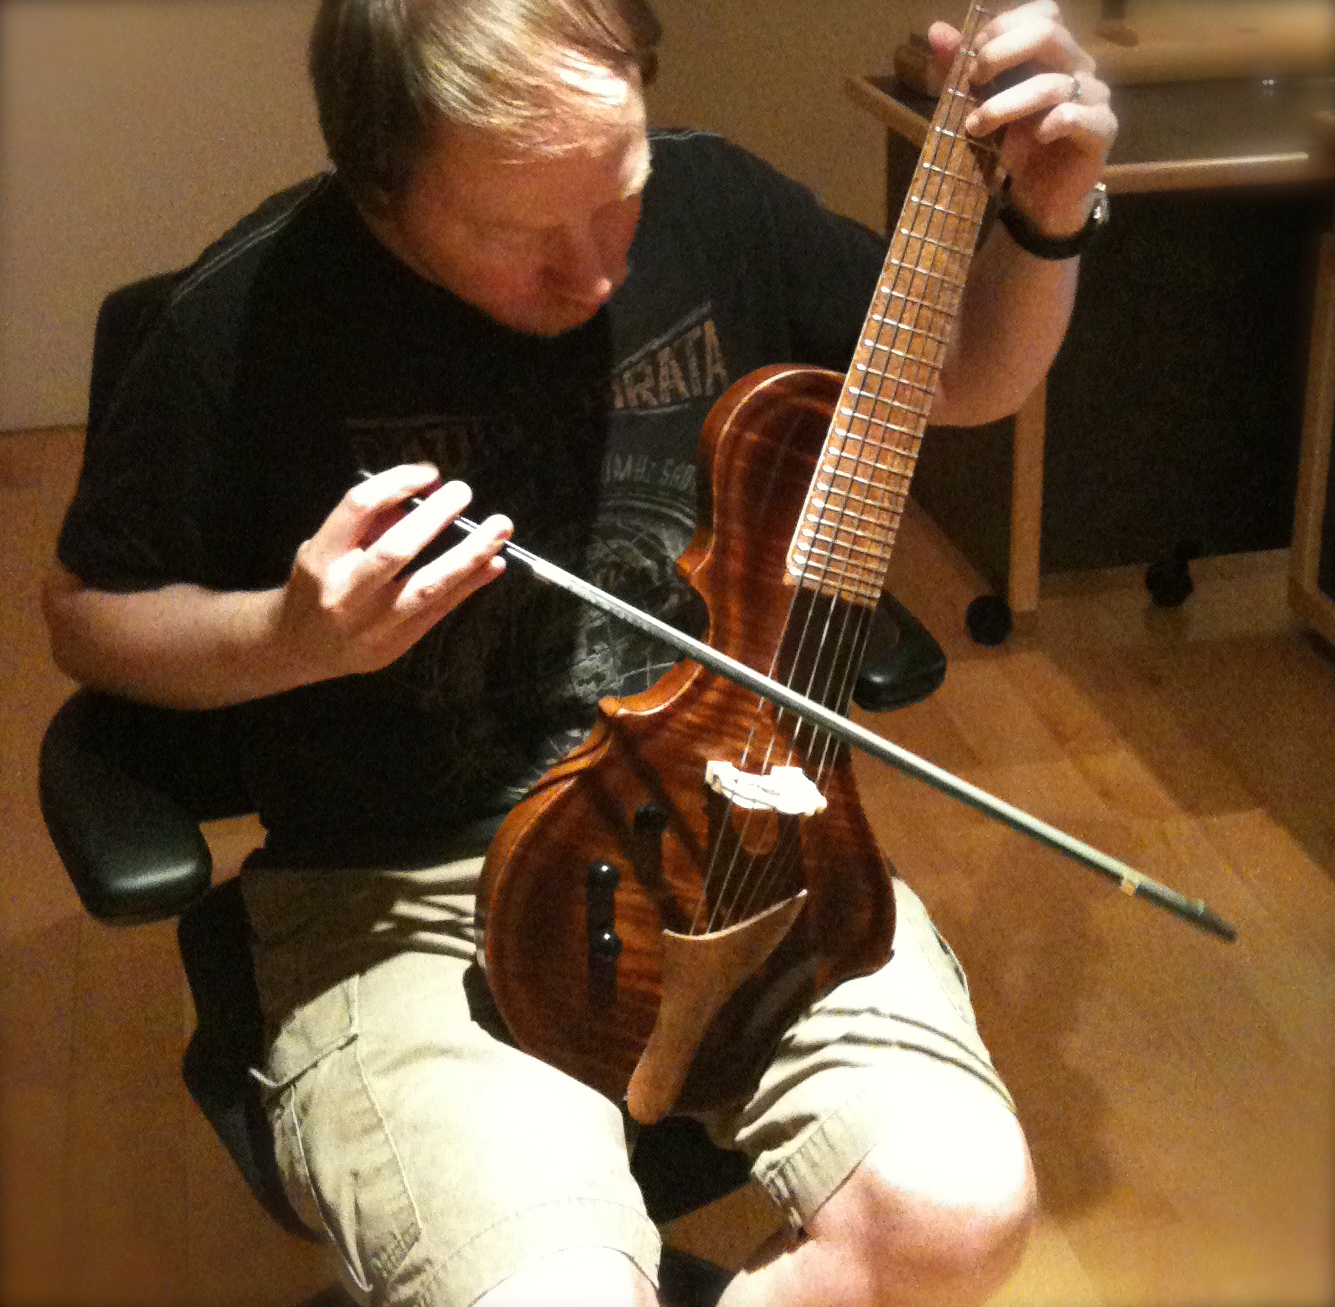 Bill playing the Guitarviol